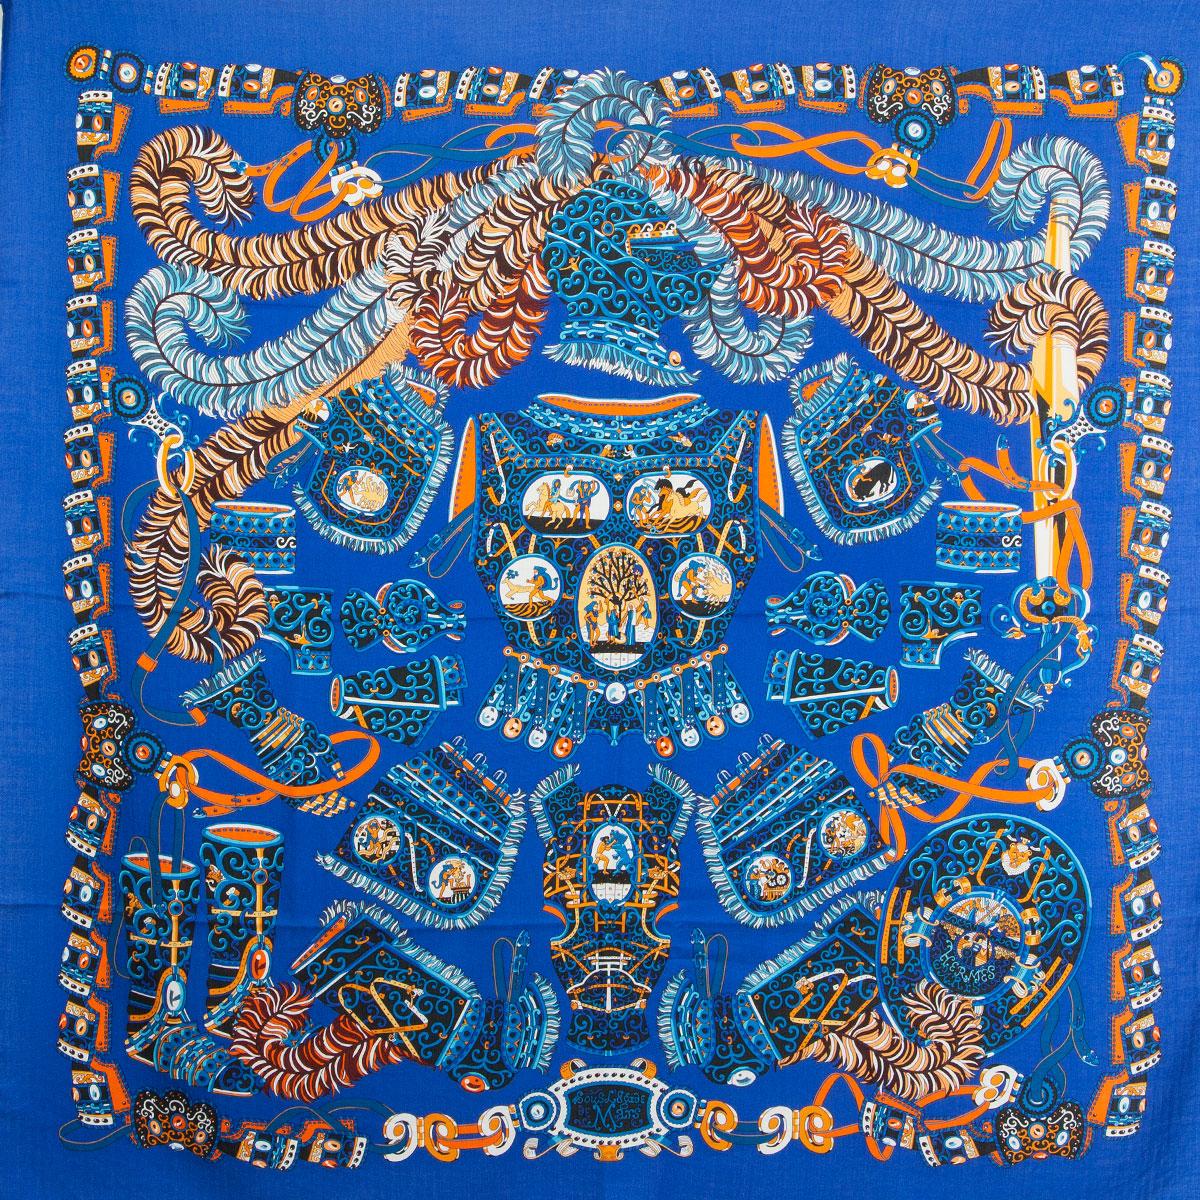 Hermes 'Sous l'Egide de Mars 140' shawl by Pierre Marie in Bleu Royal/Orange/Brun cashmere (70%) and silk (30%). Has been worn and is in virtually new condition.

Width 140cm (55in)
Height 140cm (55in)